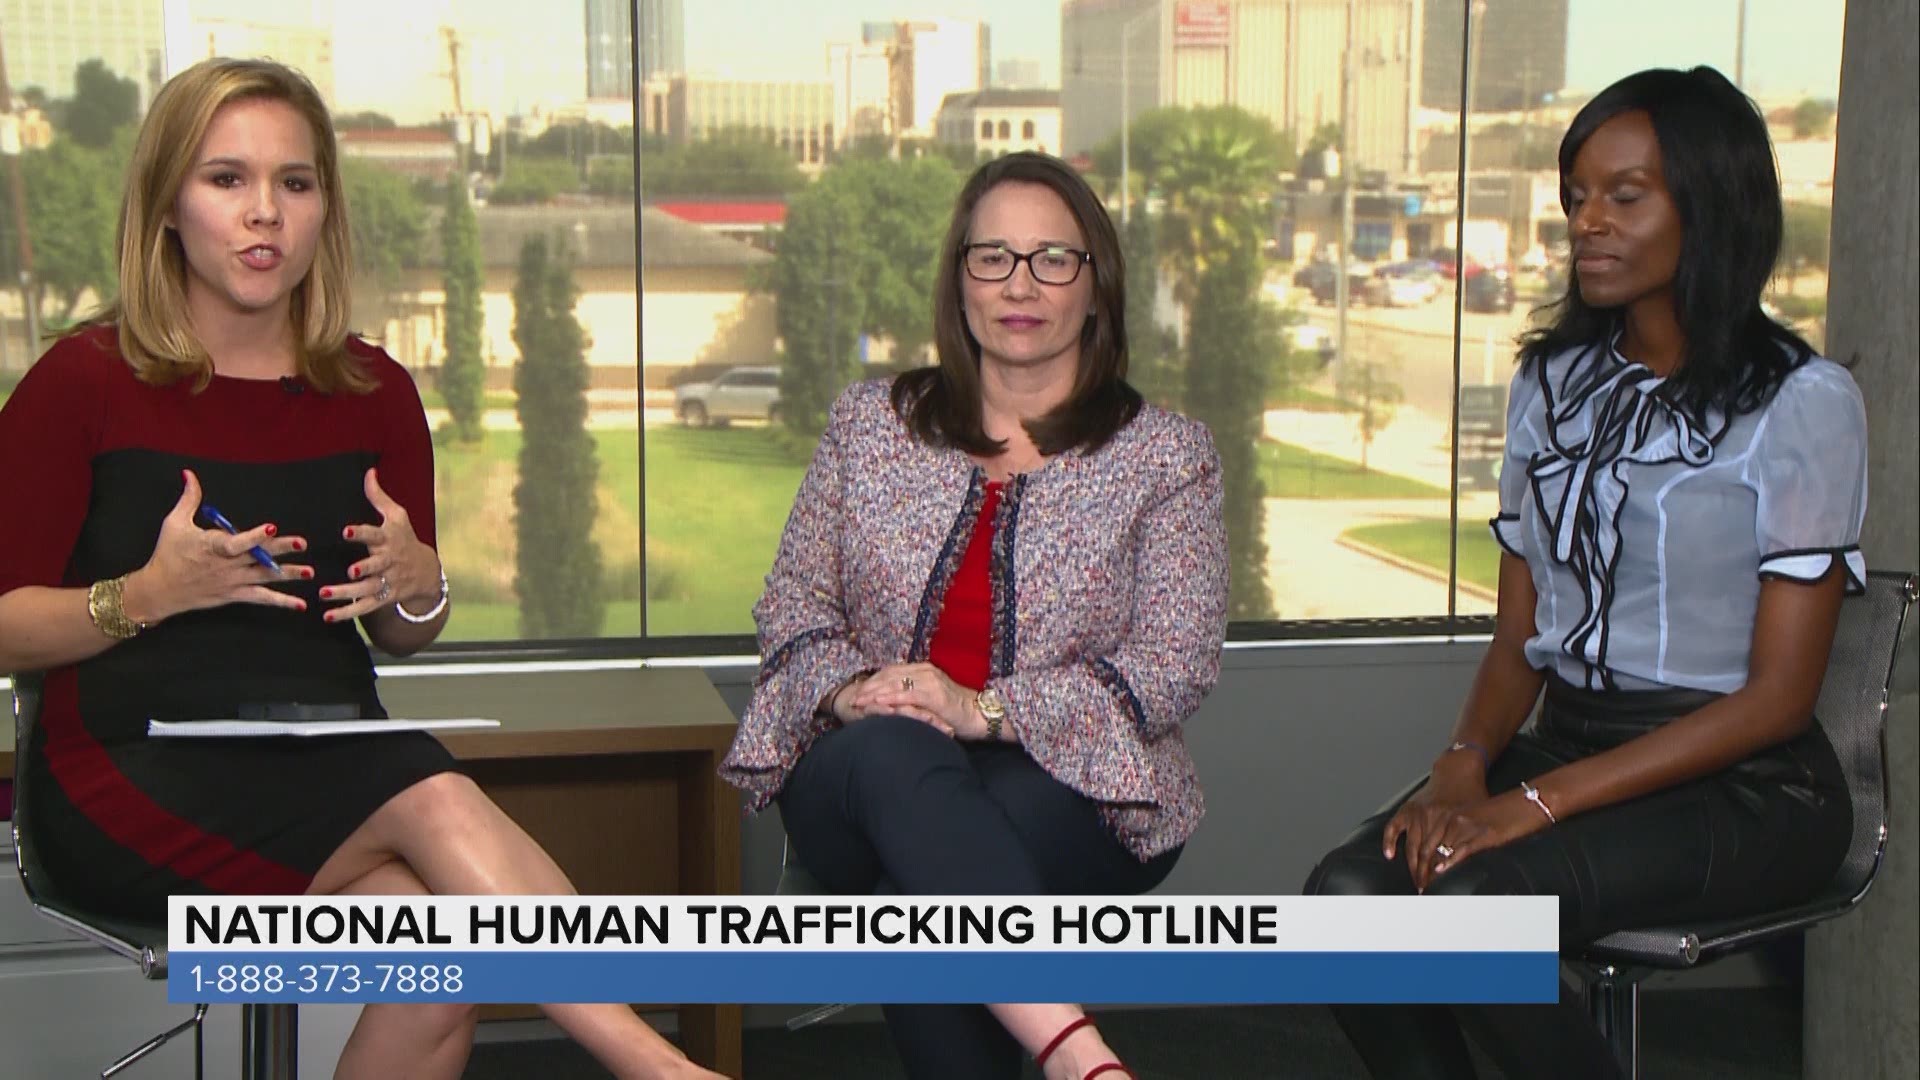 Houston is a hot spot for sex trafficking, but there's also an army of advocates ready to rescue young women and men.